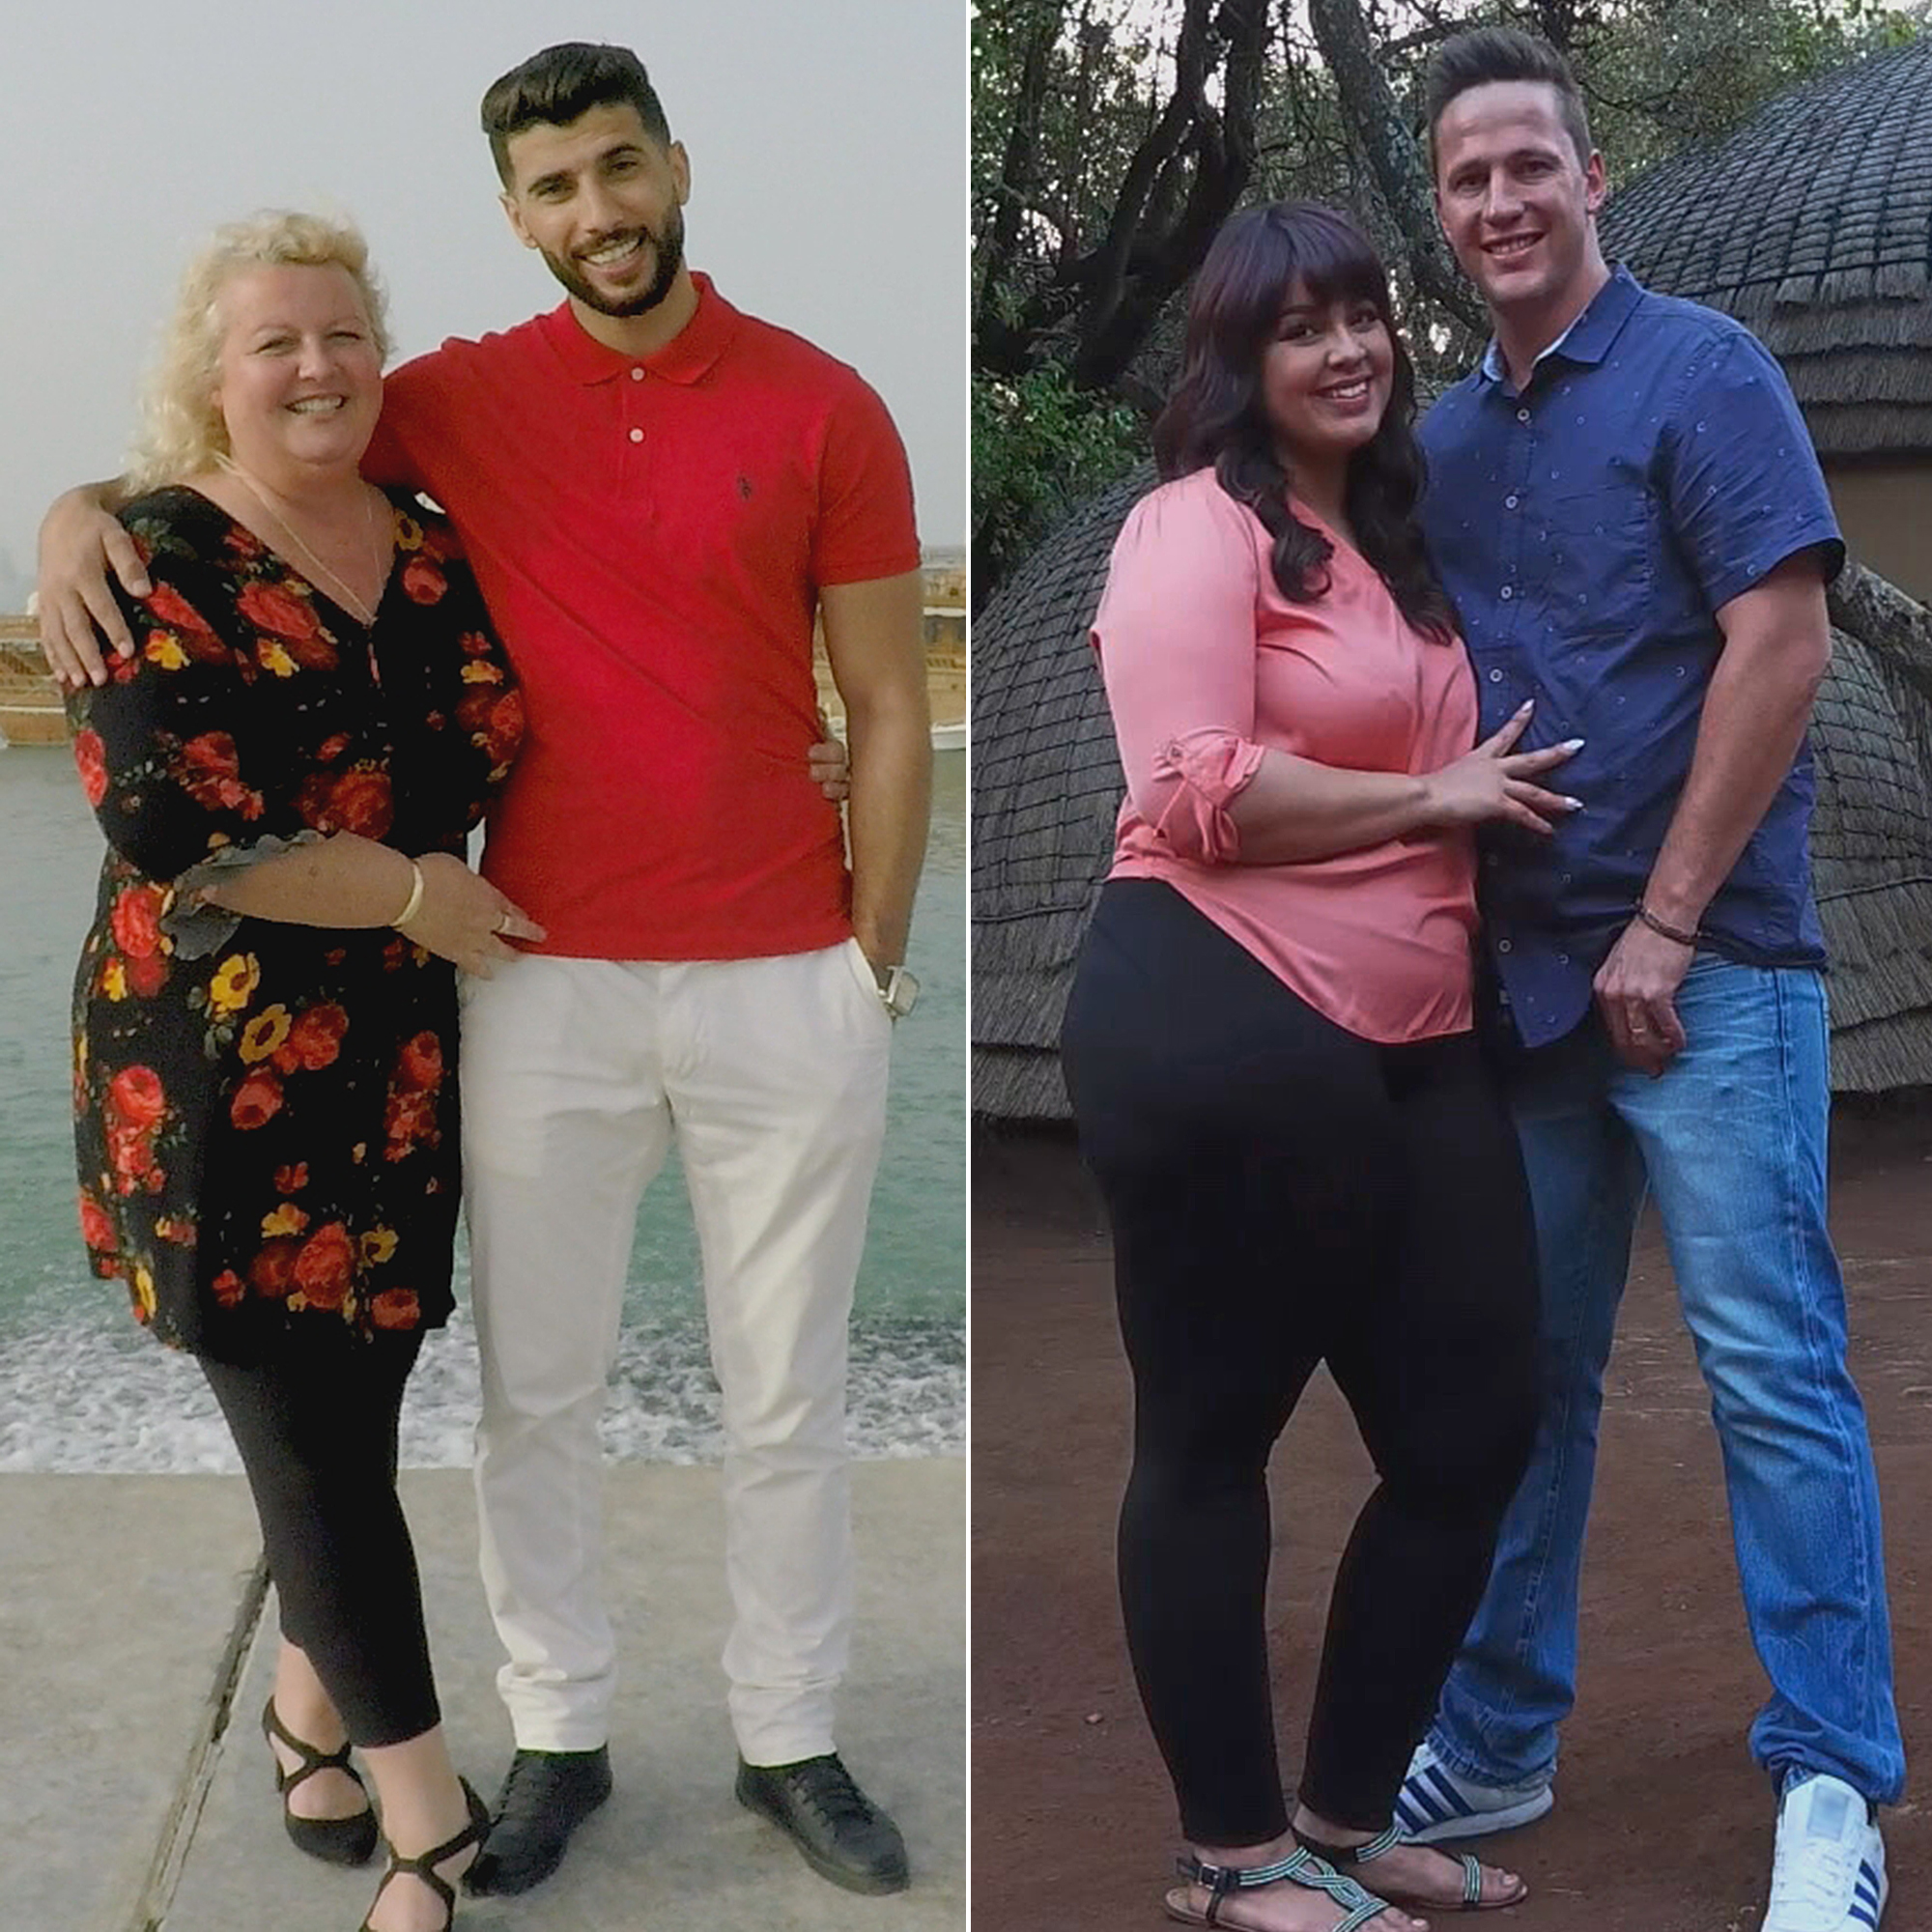 90 Day Fiancé: Before the 90 Days - TLC GO